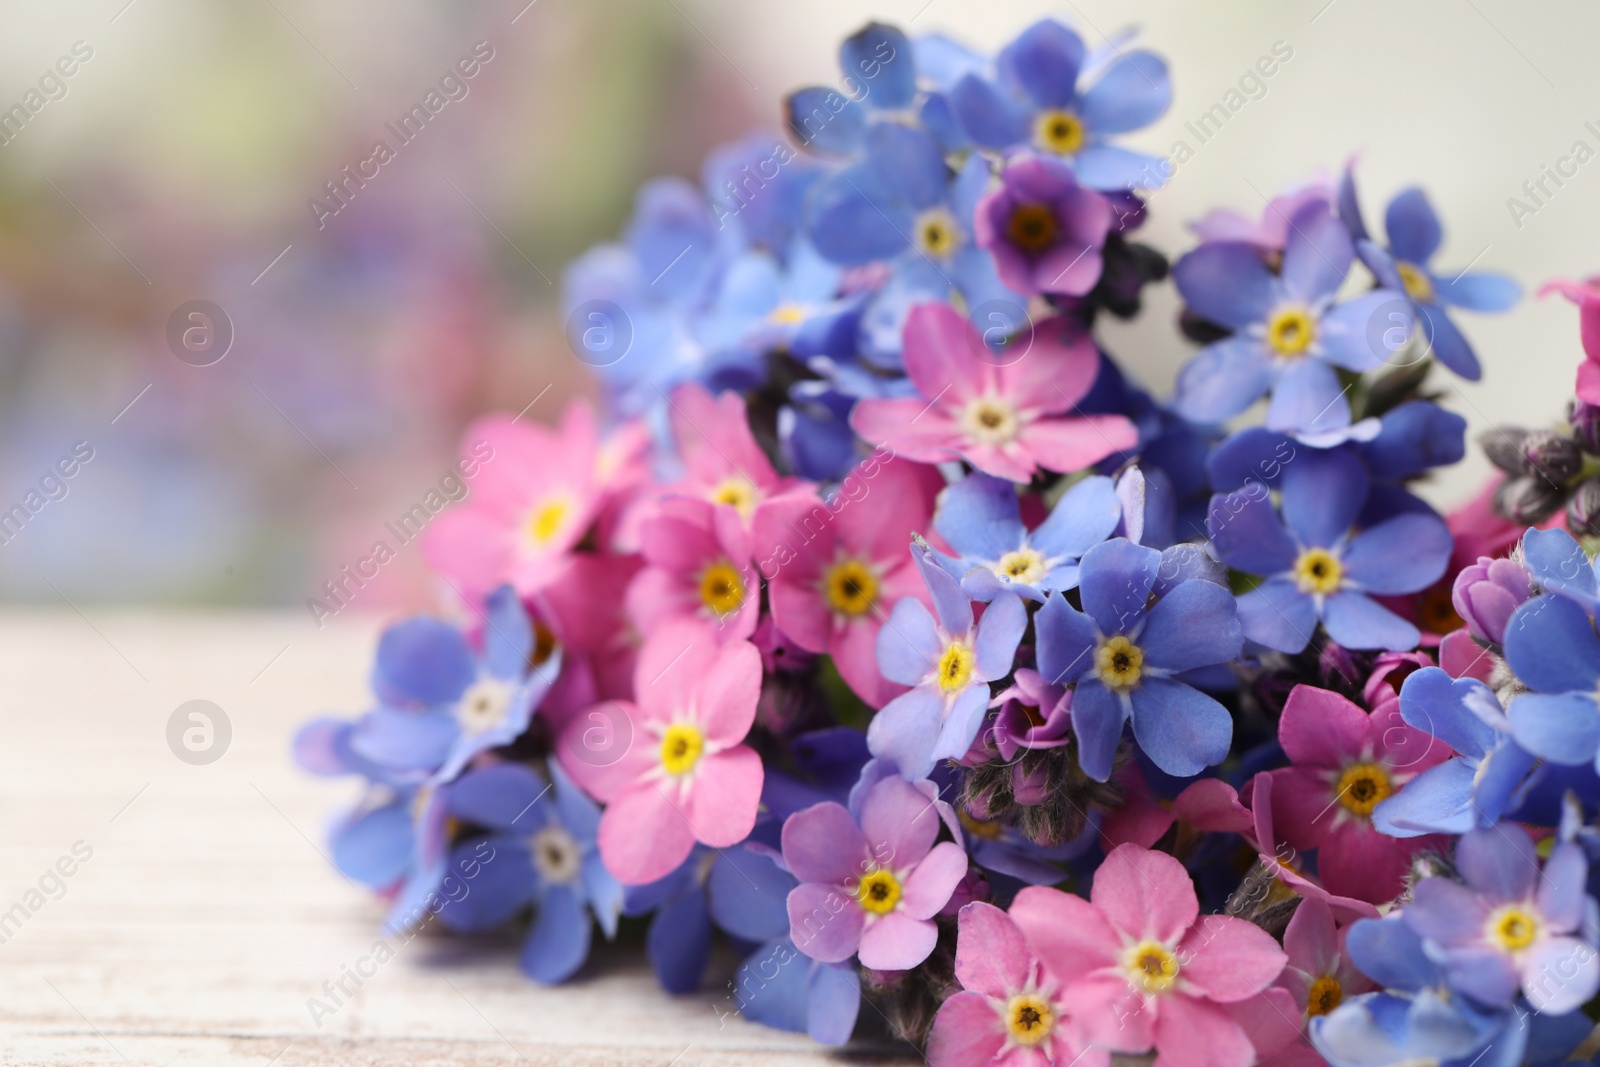 Photo of Beautiful blue and pink Forget-me-not flowers on white table